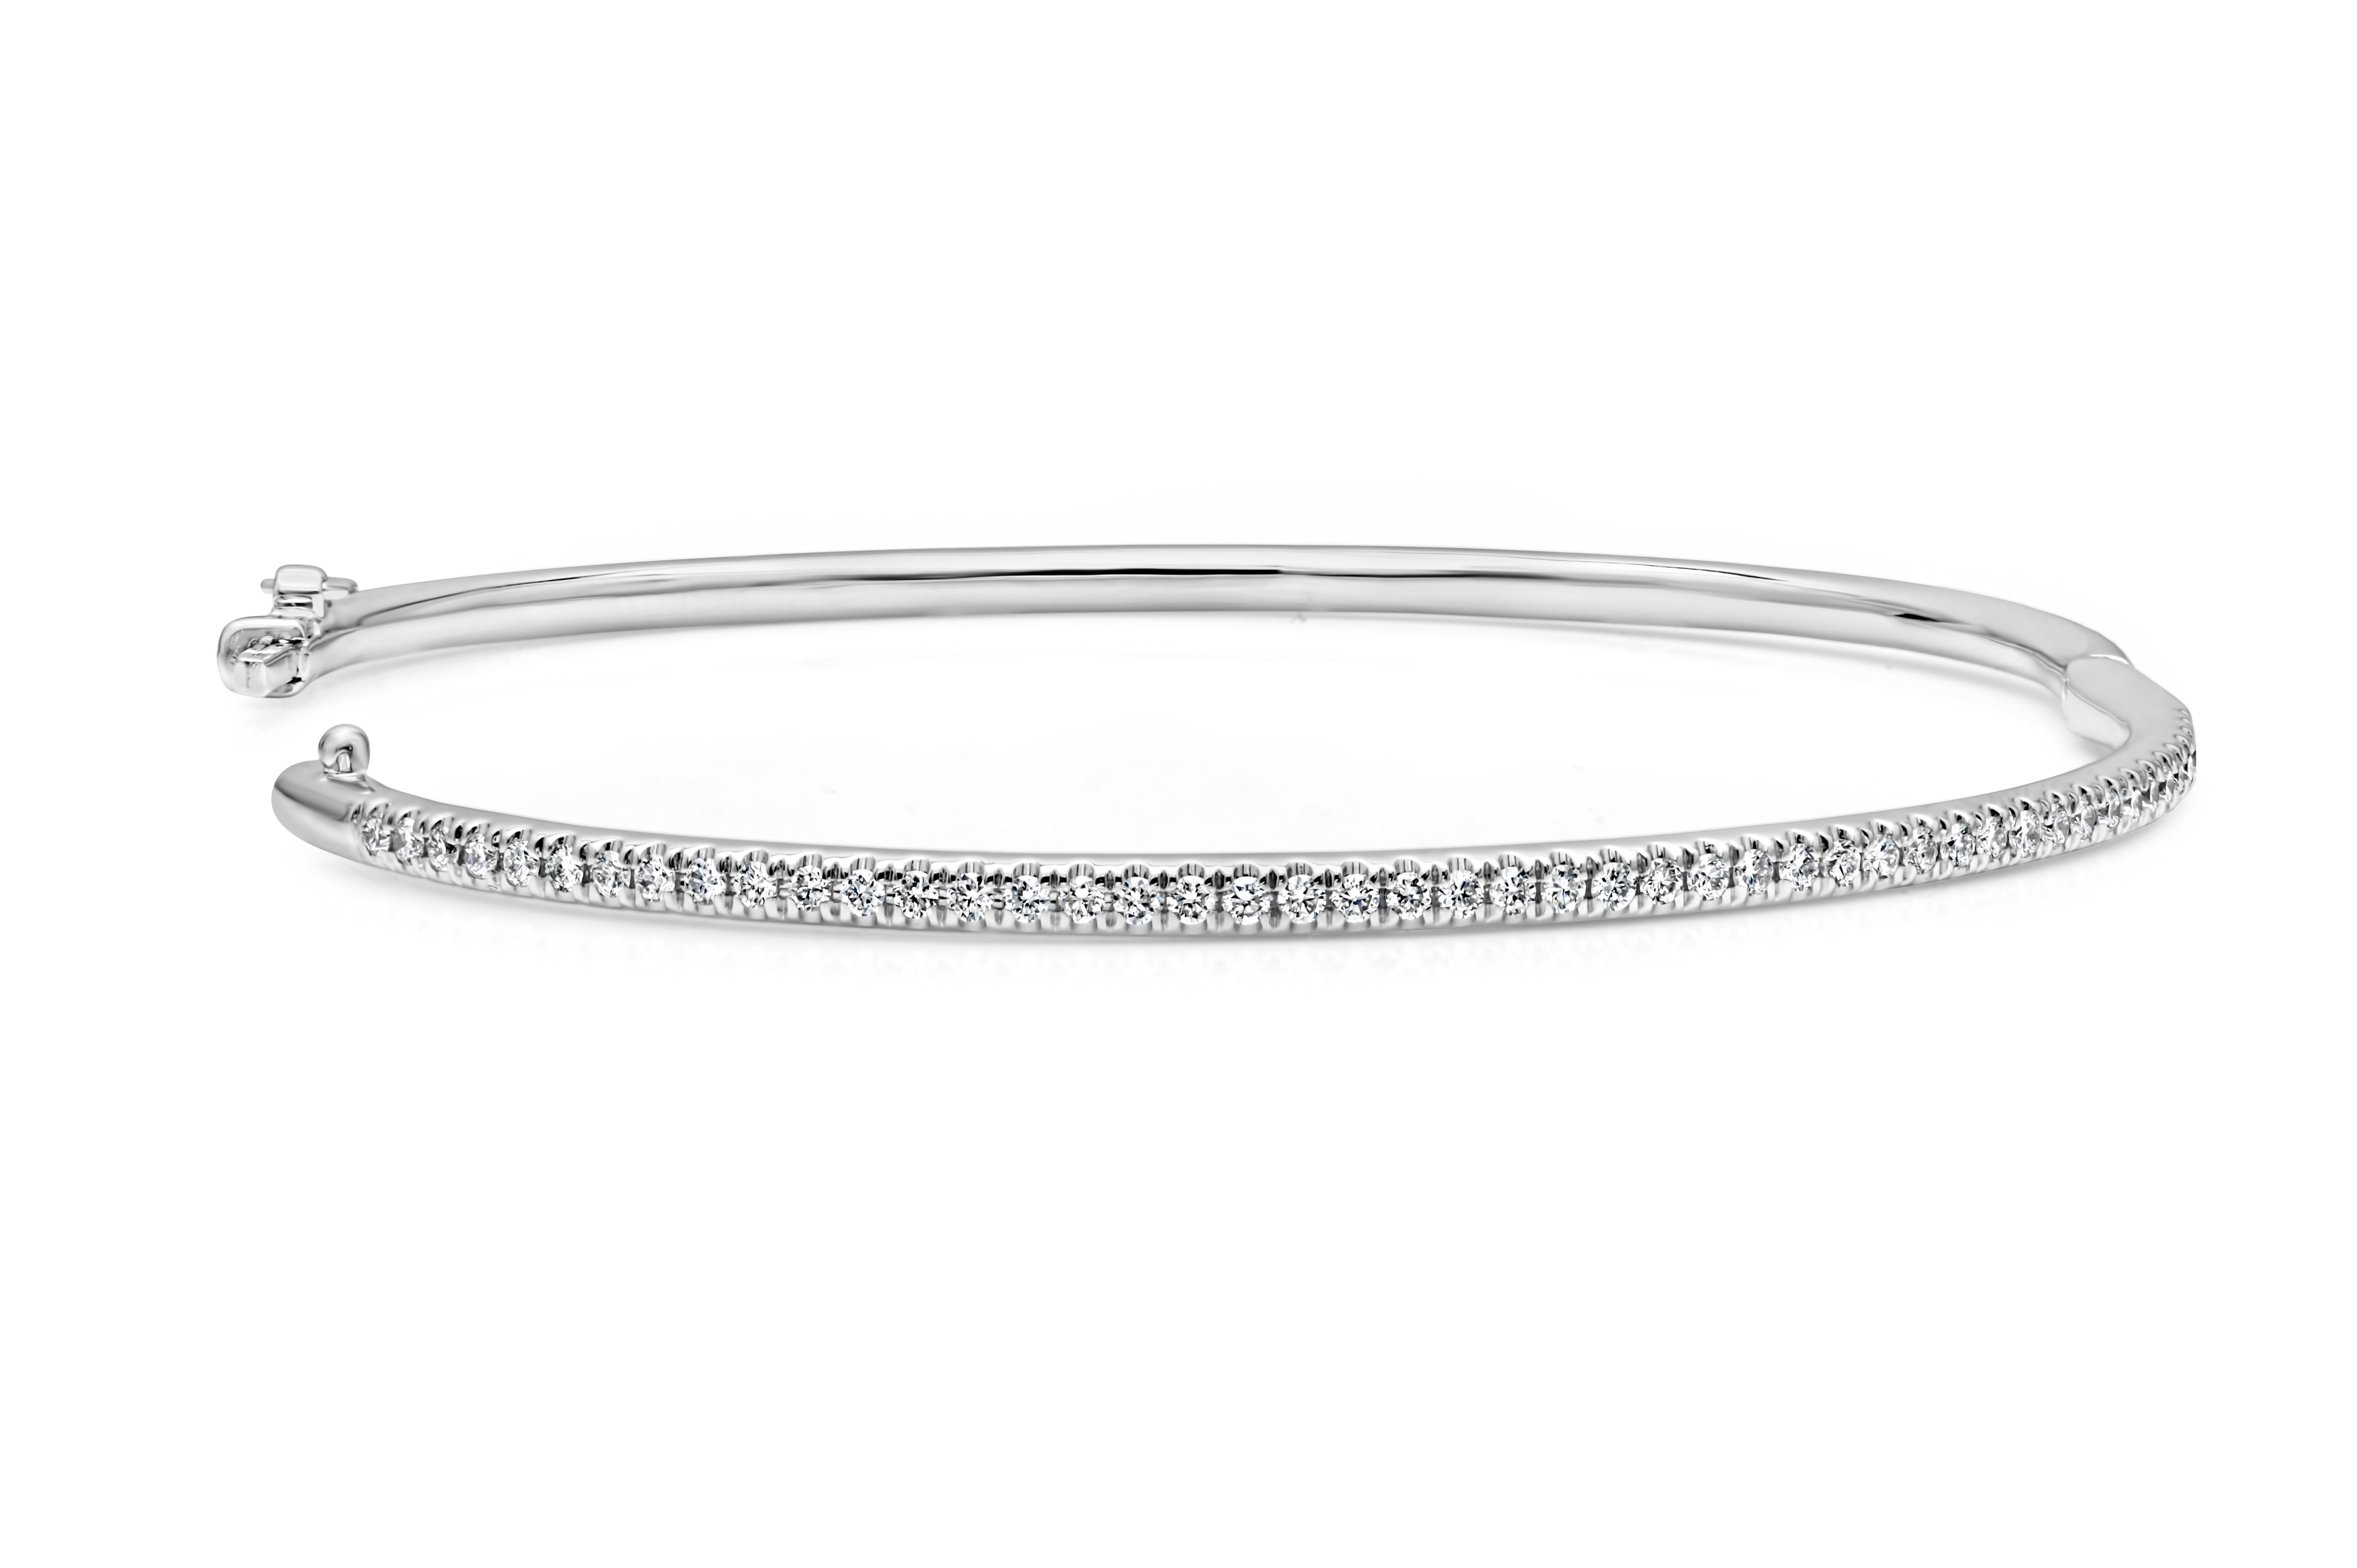 A simple and elegant bangle bracelet, featuring 47 round brilliant cut diamonds weighing 0.50 carats total with F color and VS clarity. Finely set on 14K white gold, with a clasp for secure wear. This bracelet is 7.25 inches in length.

Roman